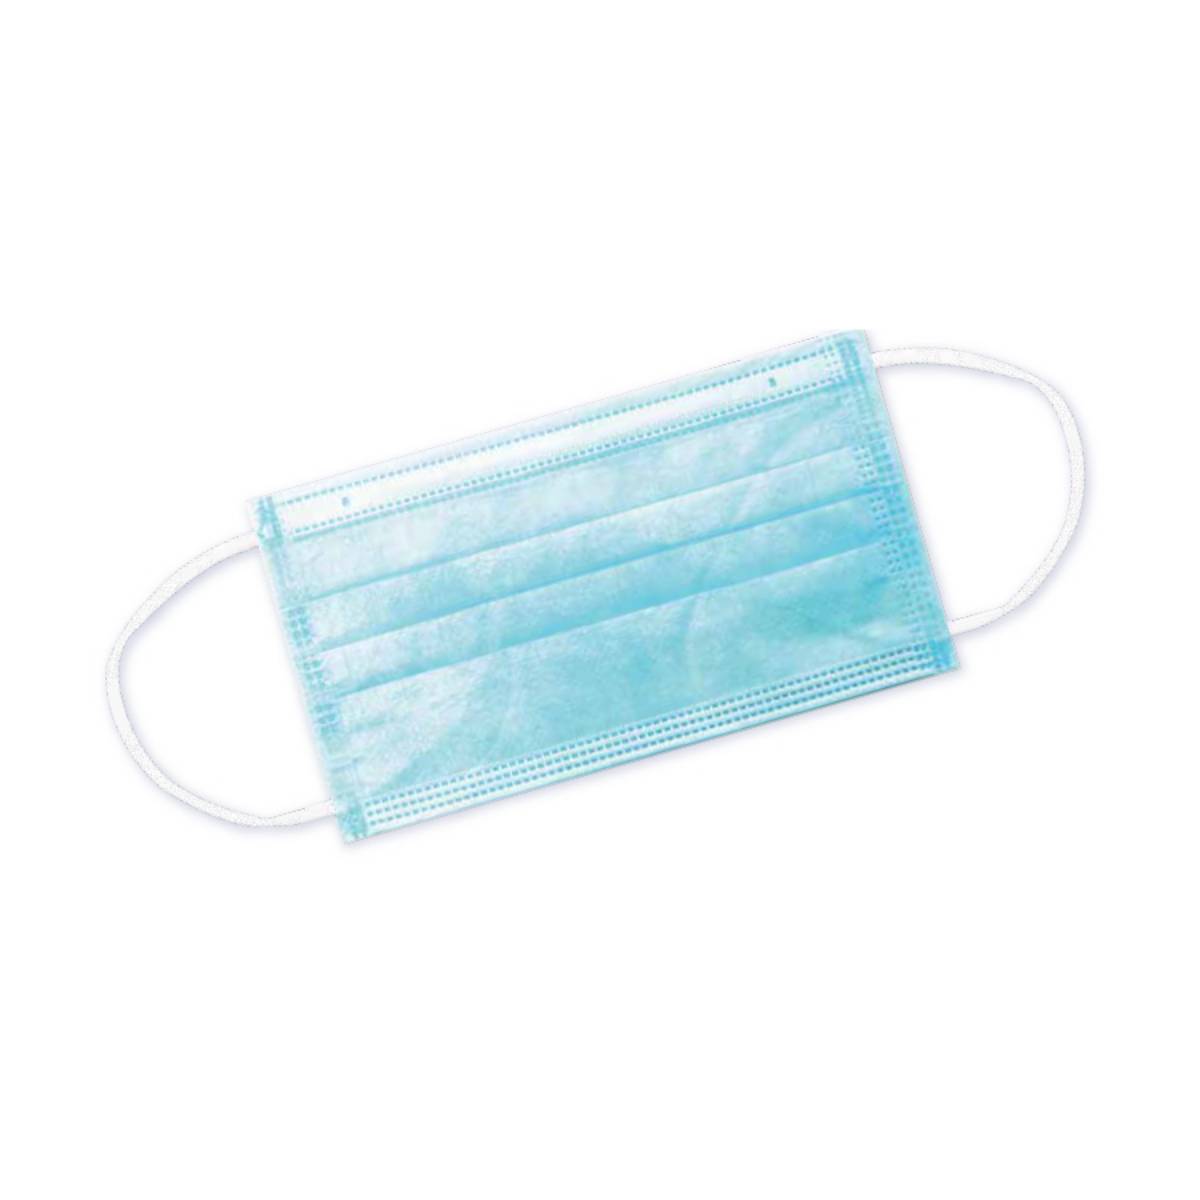 Pack of 50 Type IIR Disposable Surgical Face Mask